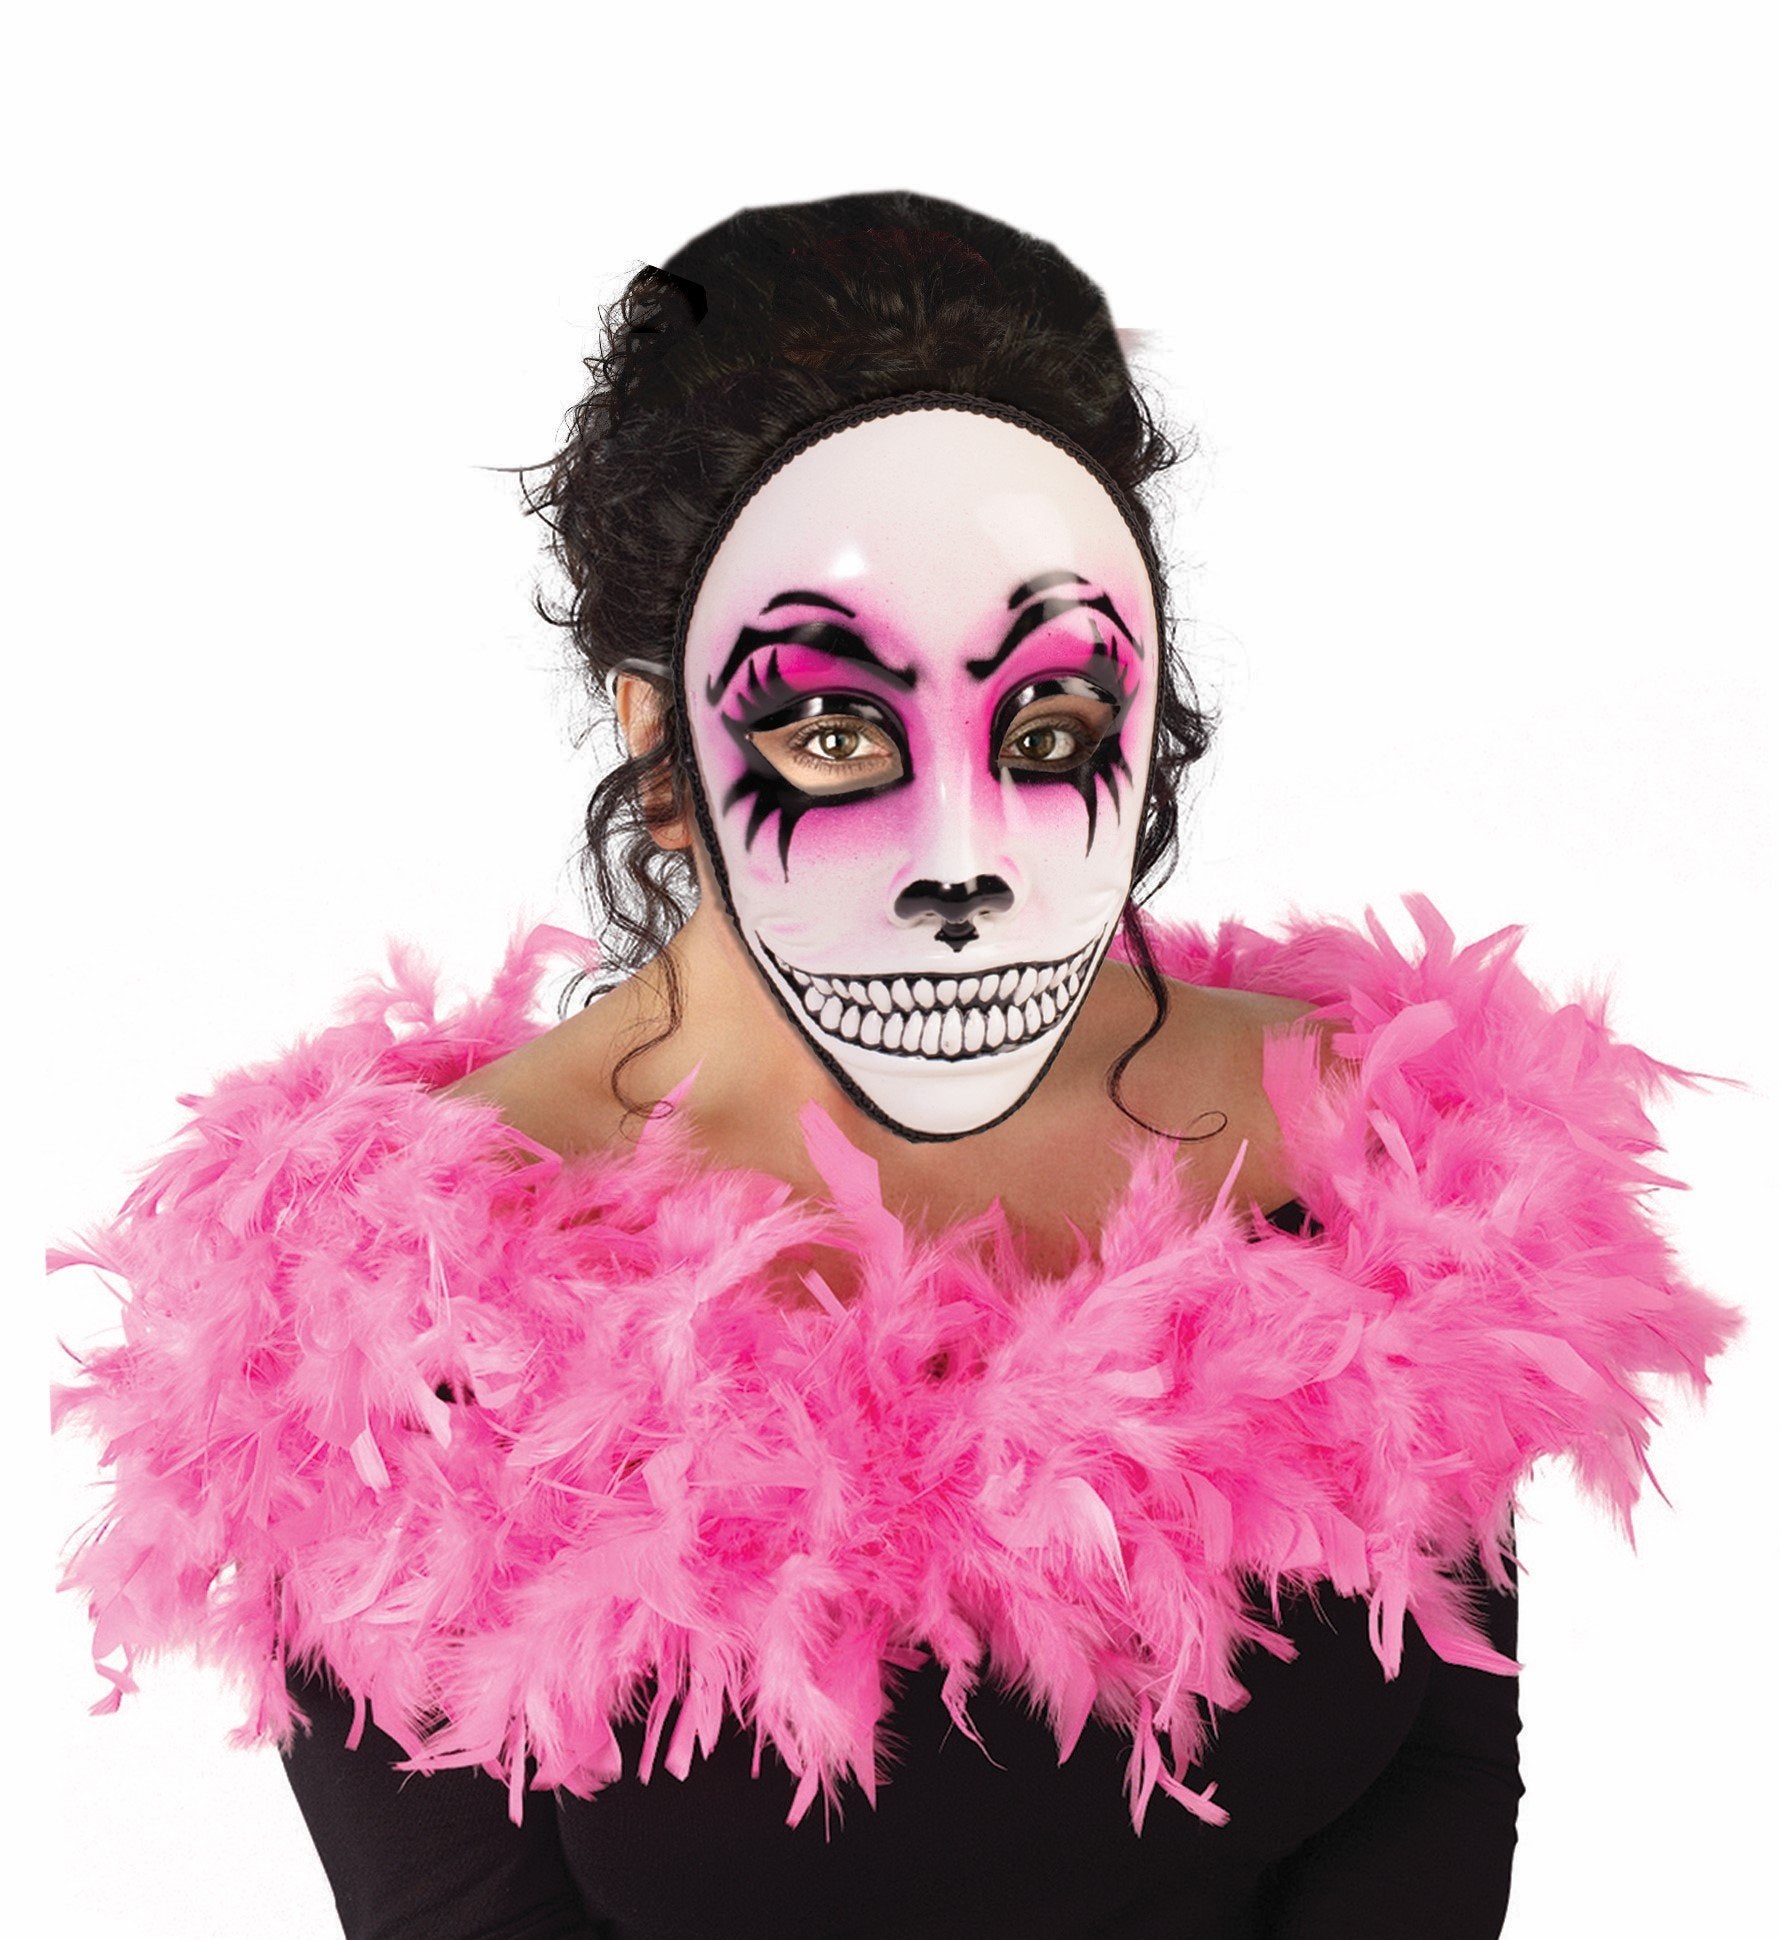 Skull with big smile and pink around eyes